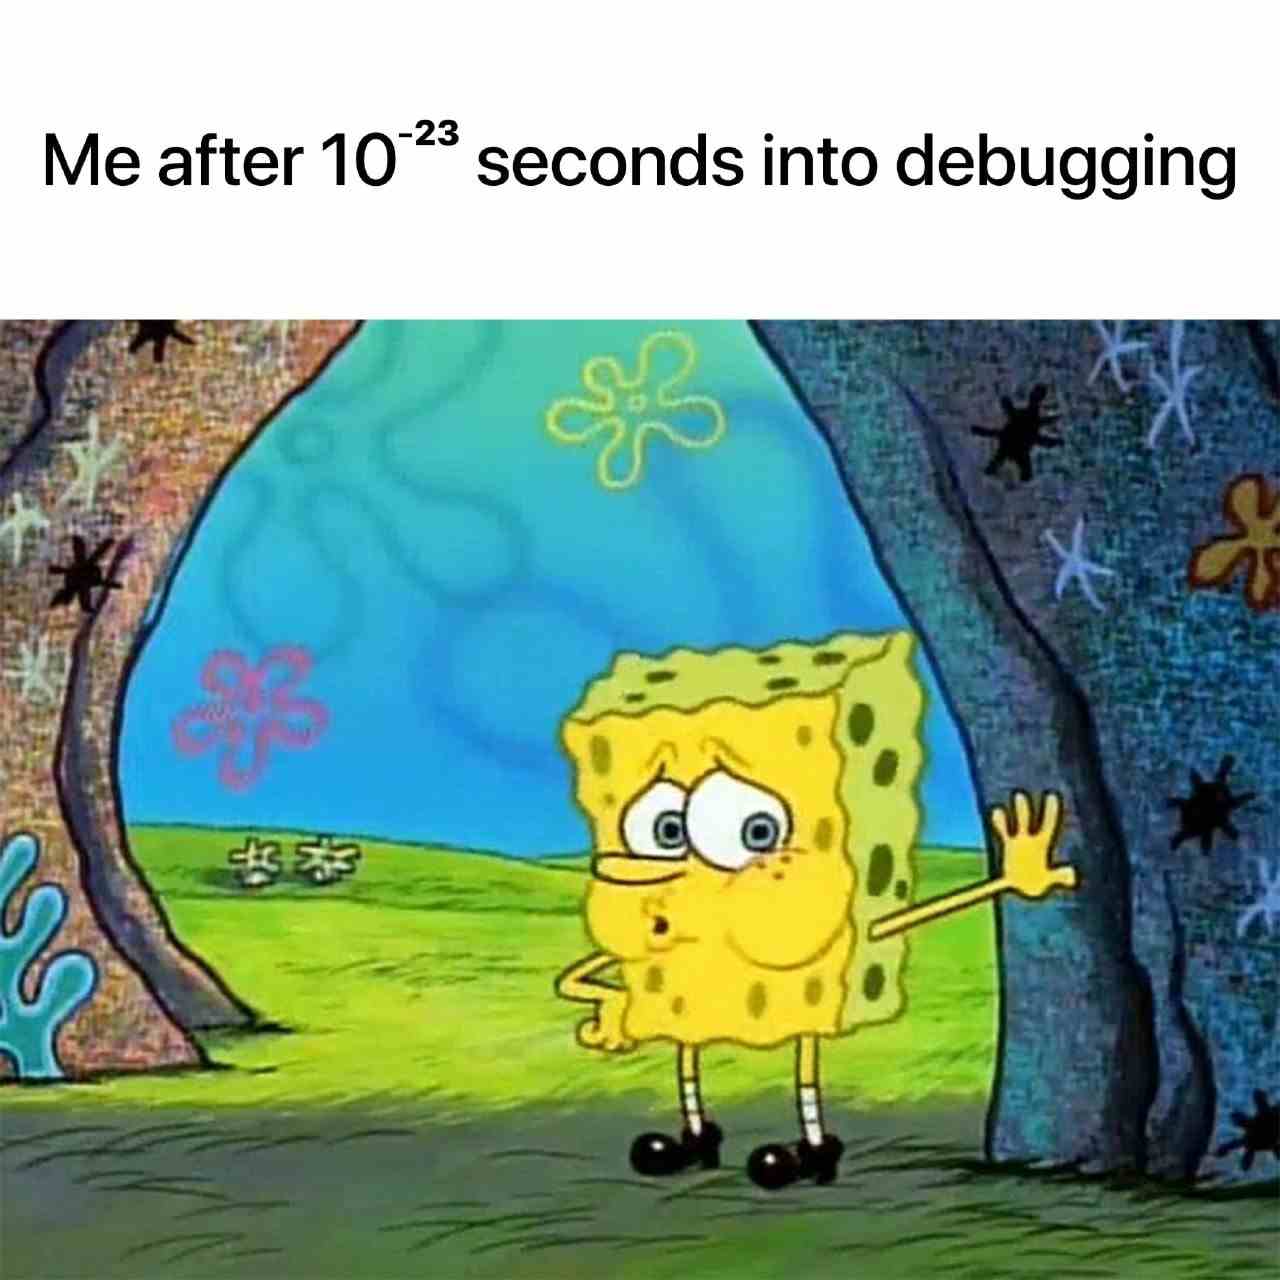 Me after 10^-23 seconds into debugging